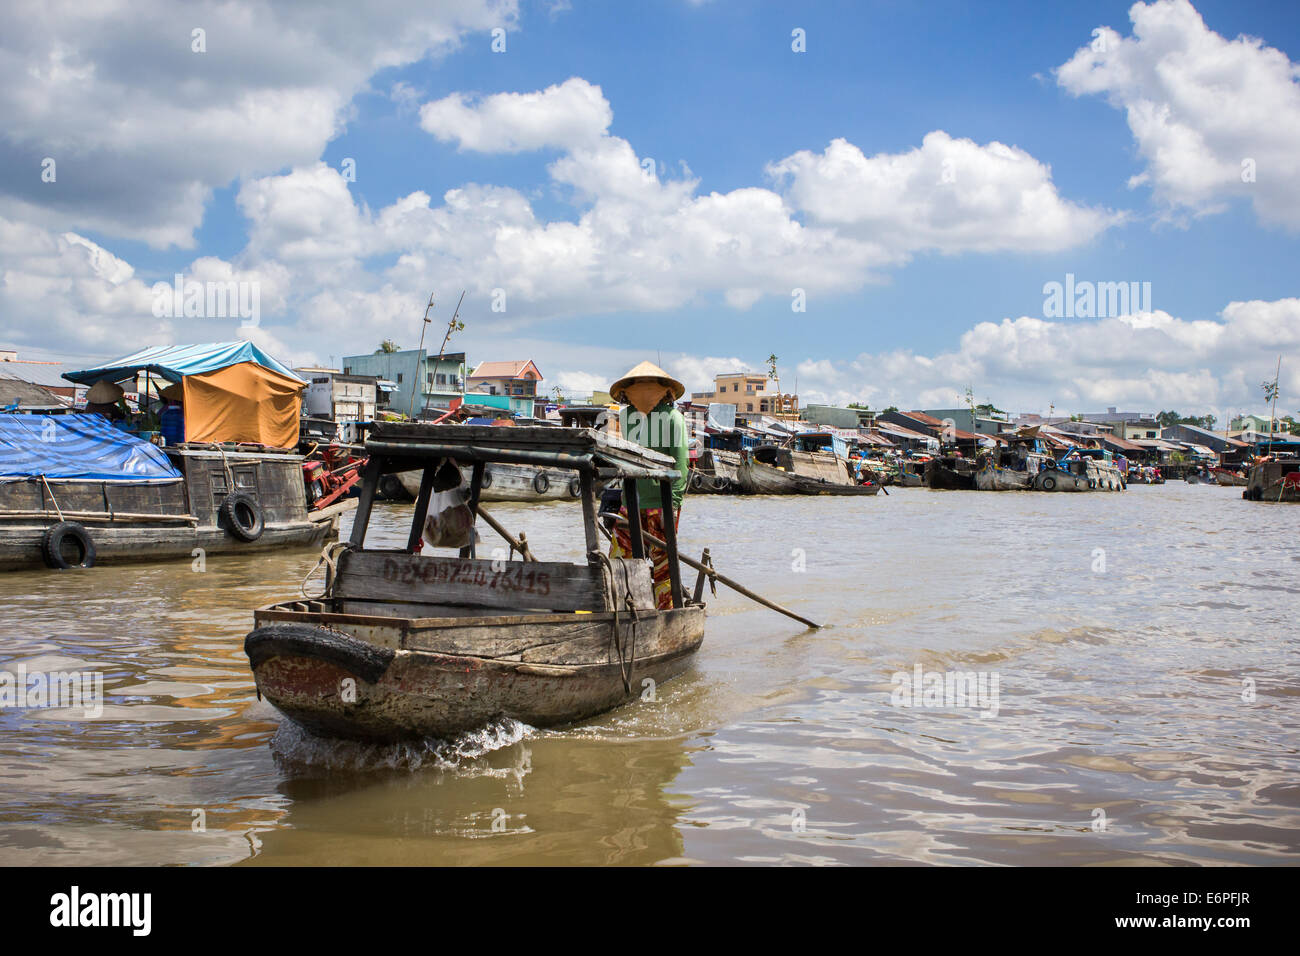 River view of Cai Rang Floating Market, near Can Tho, Mekong Delta, south Vietnam. early in the morning under a cloudy sky. Stock Photo